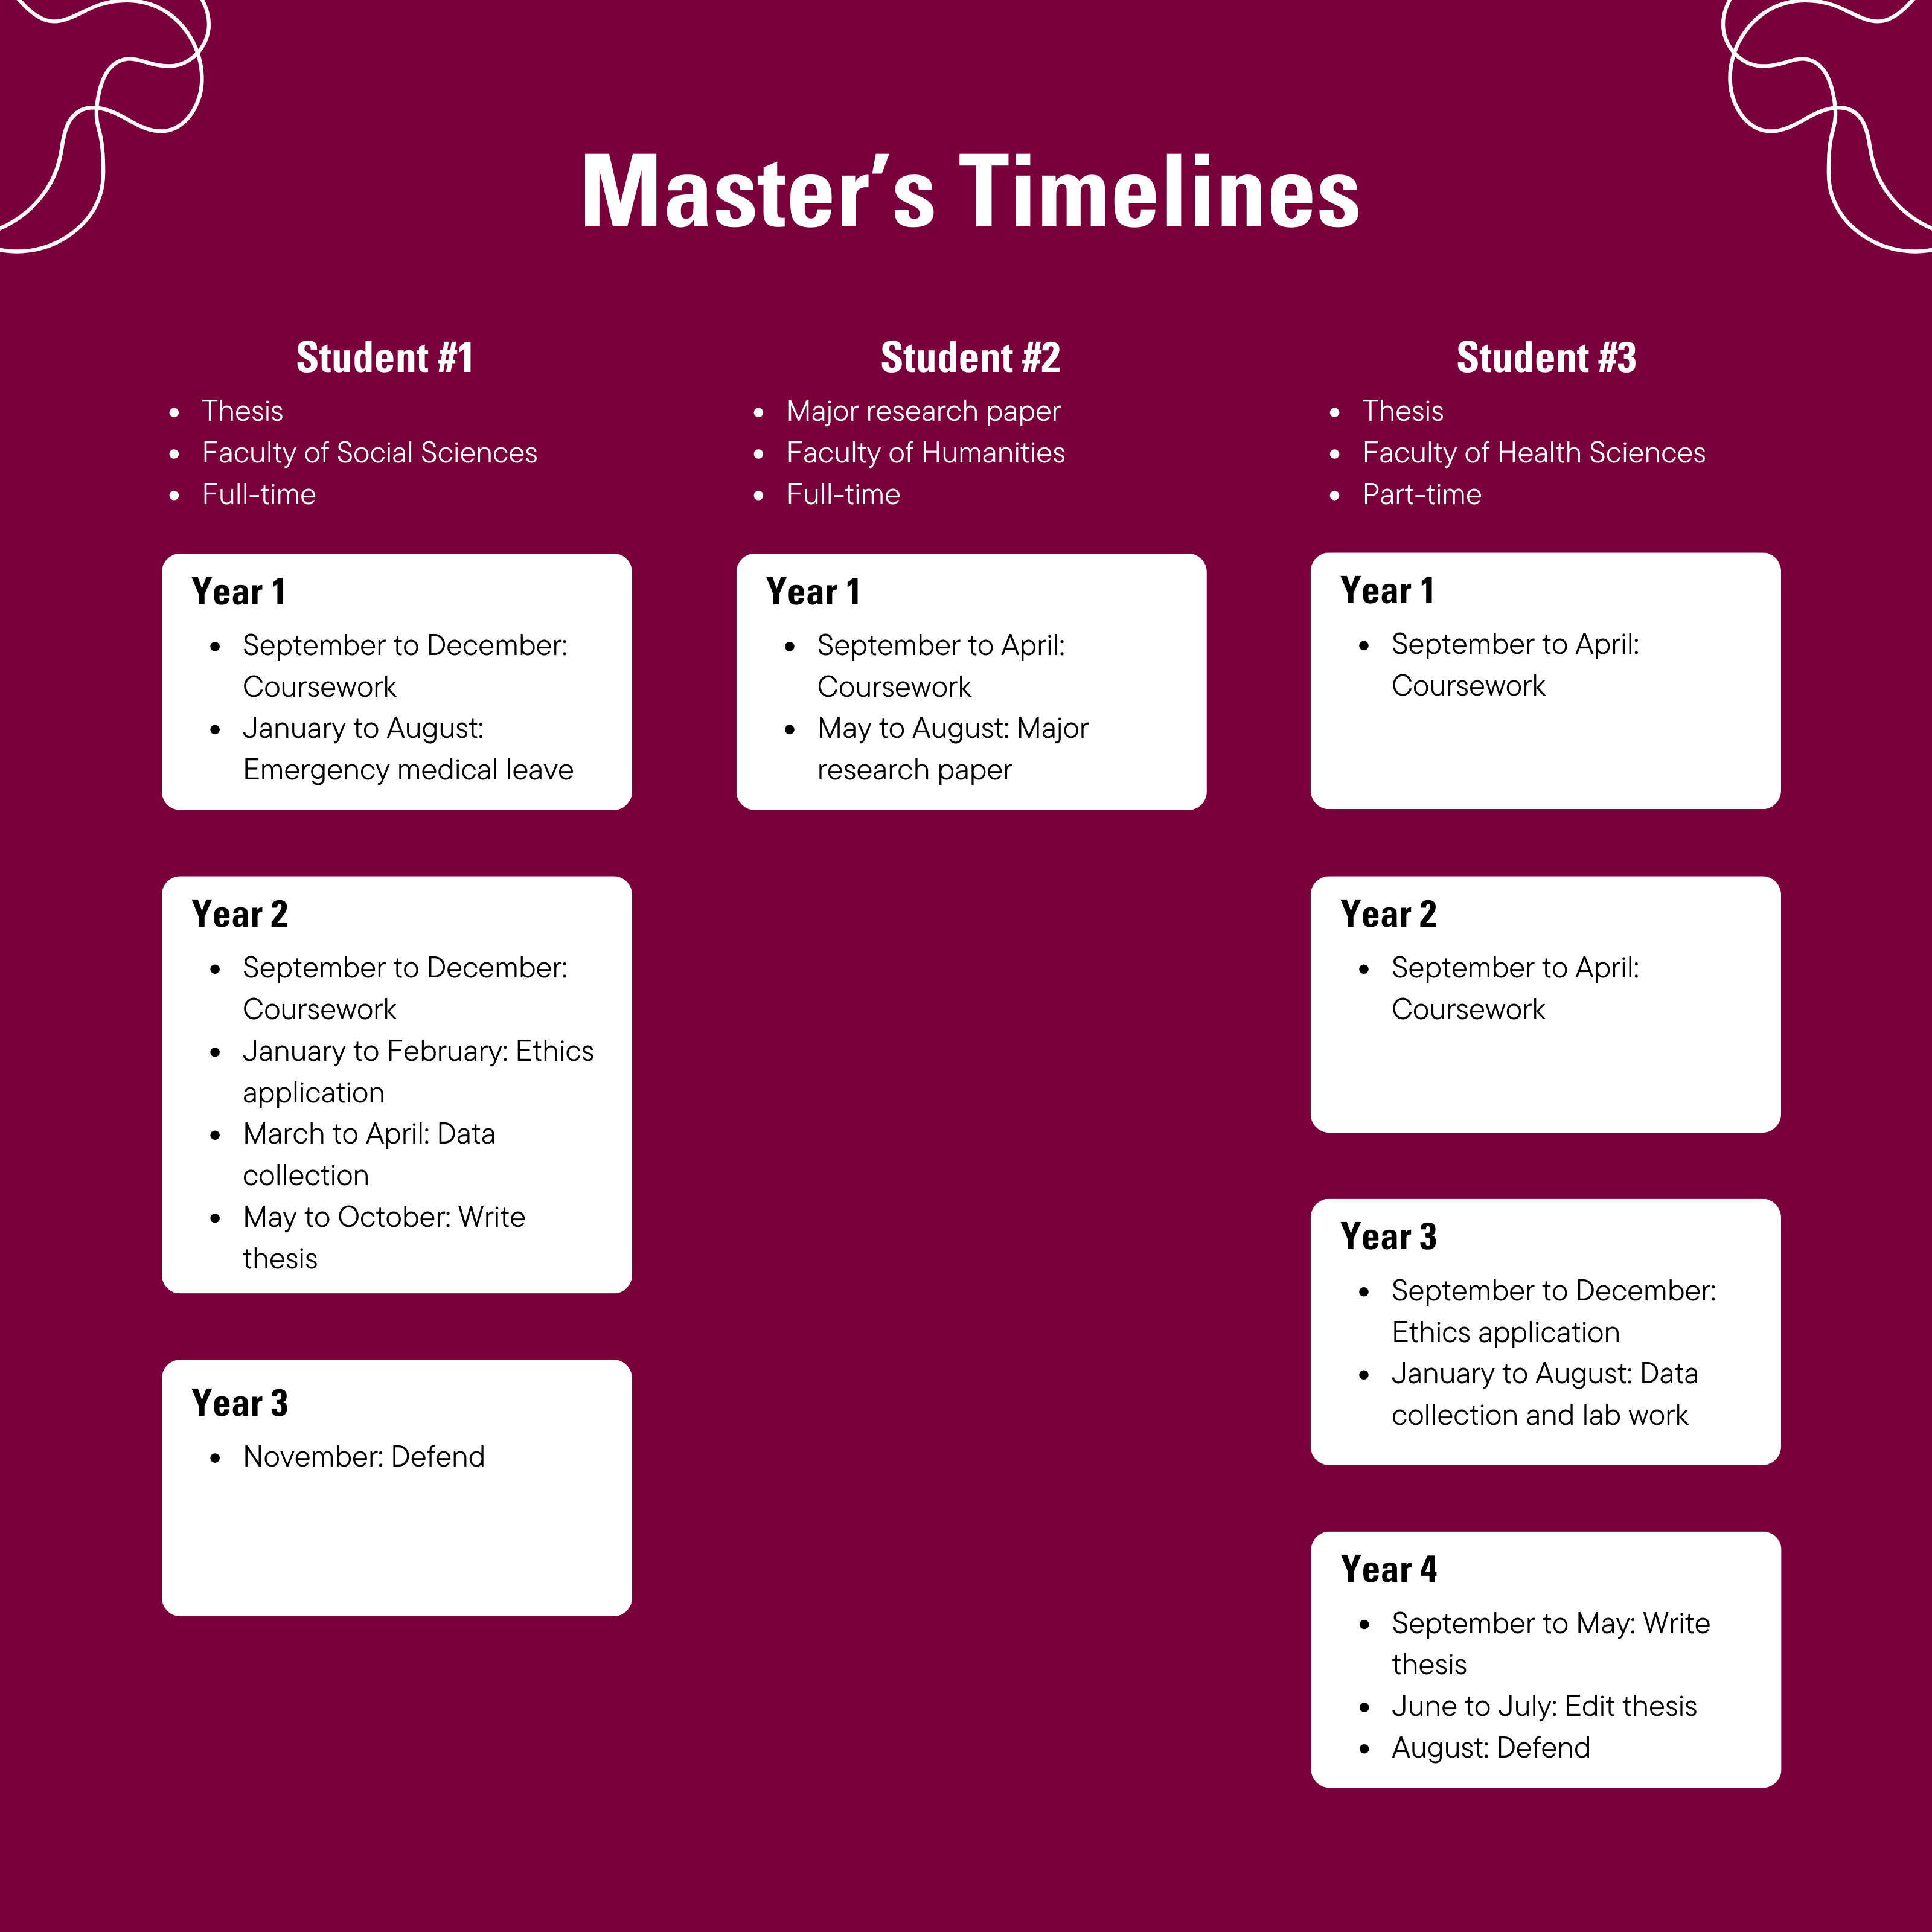 Chart comparing Master’s Timelines for three different students with text description below.